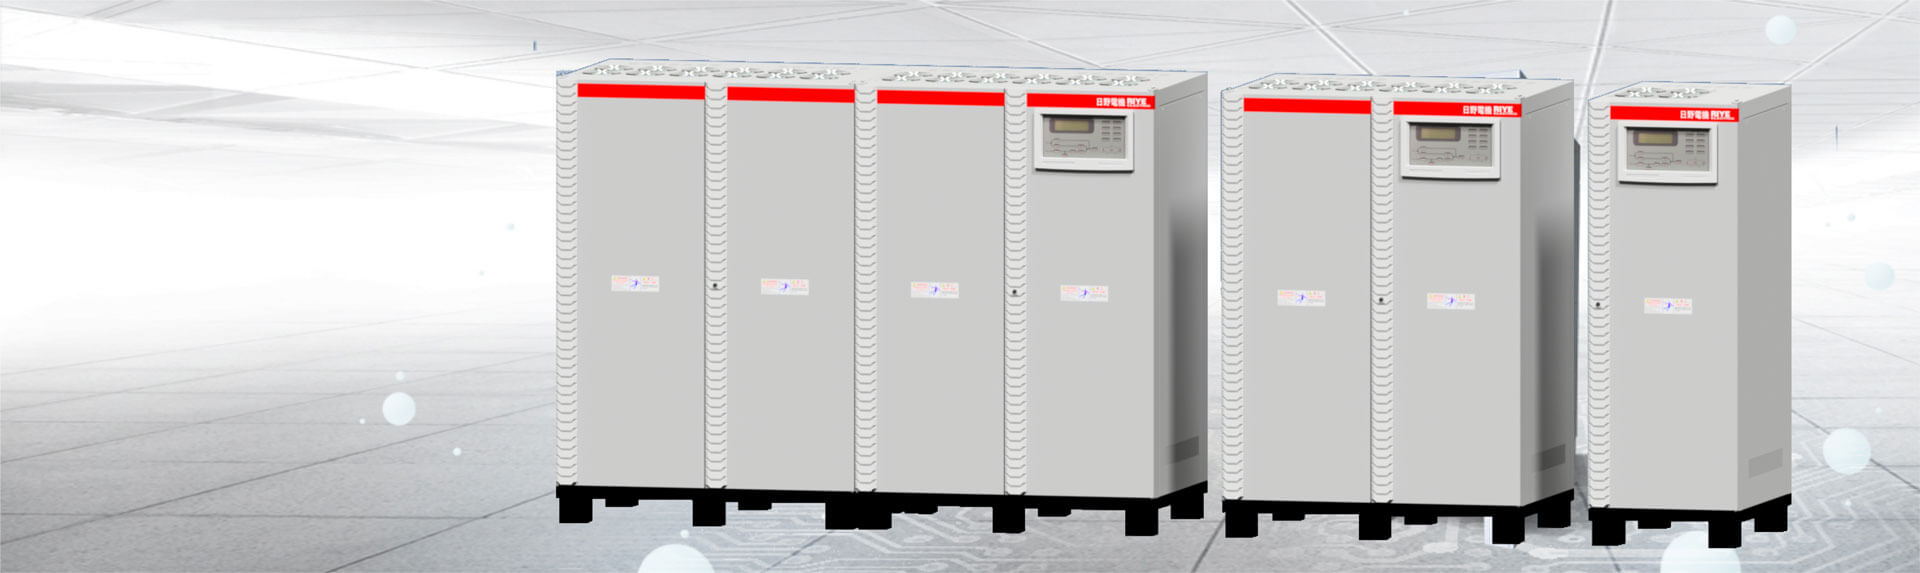 Super-tough structure and Super performance<br>High safety, High stability<br>Industrial-Grade Uninterruptible Power System